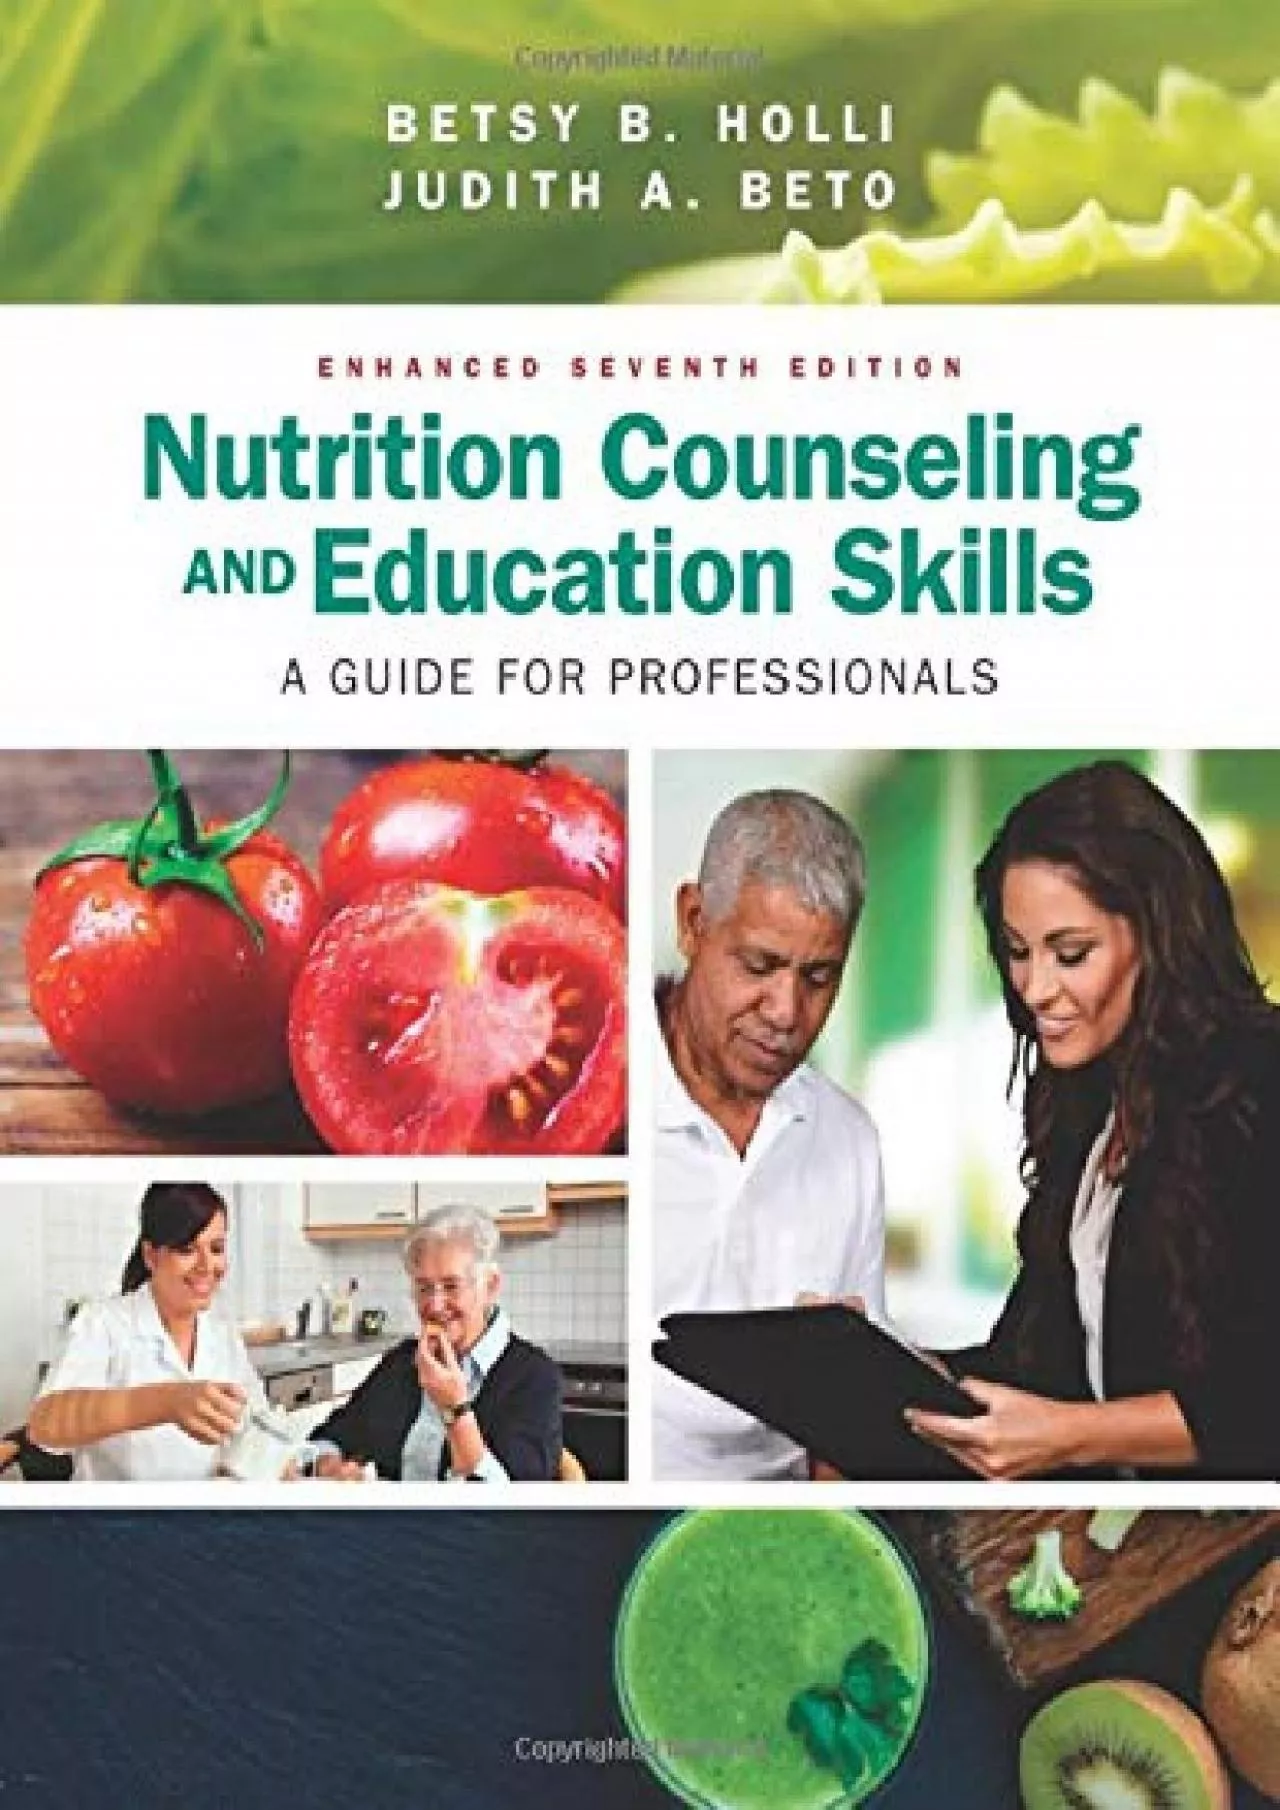 (BOOK)-Nutrition Counseling and Education Skills: A Guide for Professionals: A Guide for